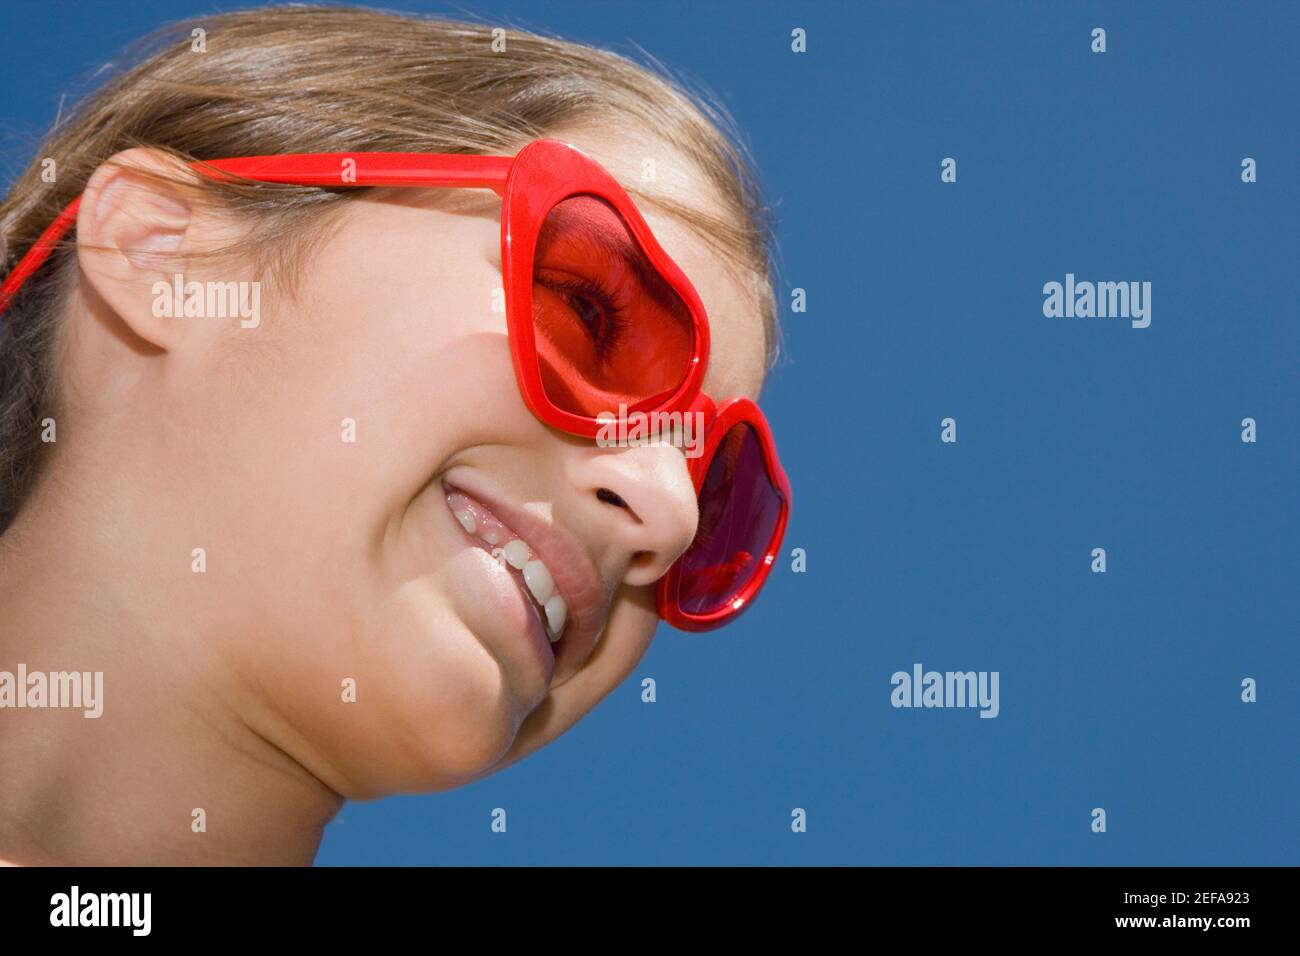 Low angle view of a girl wearing red sunglasses and smiling Stock Photo